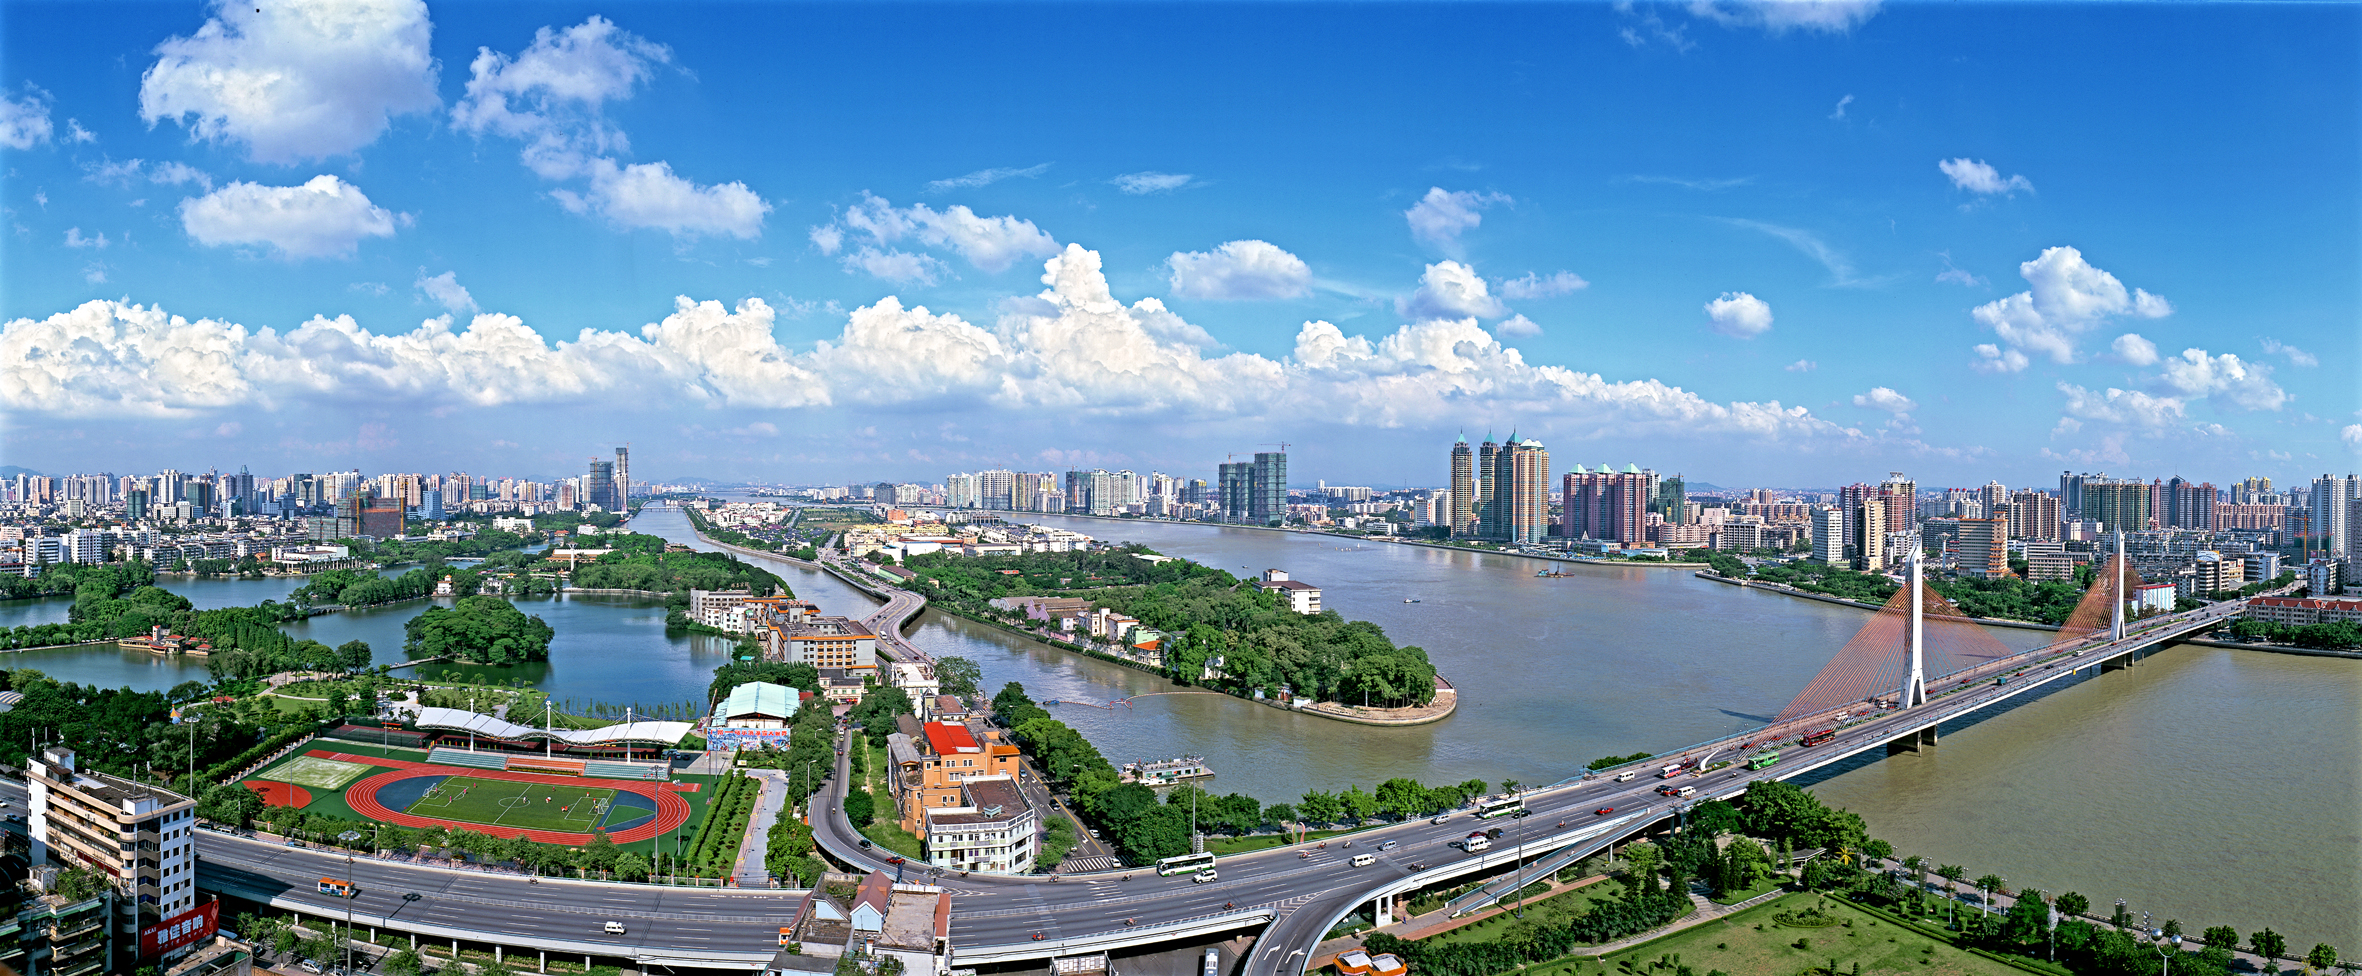 Guangzhou Skyline High Resolution Hd Wallpaper Cars 1002819 Picture